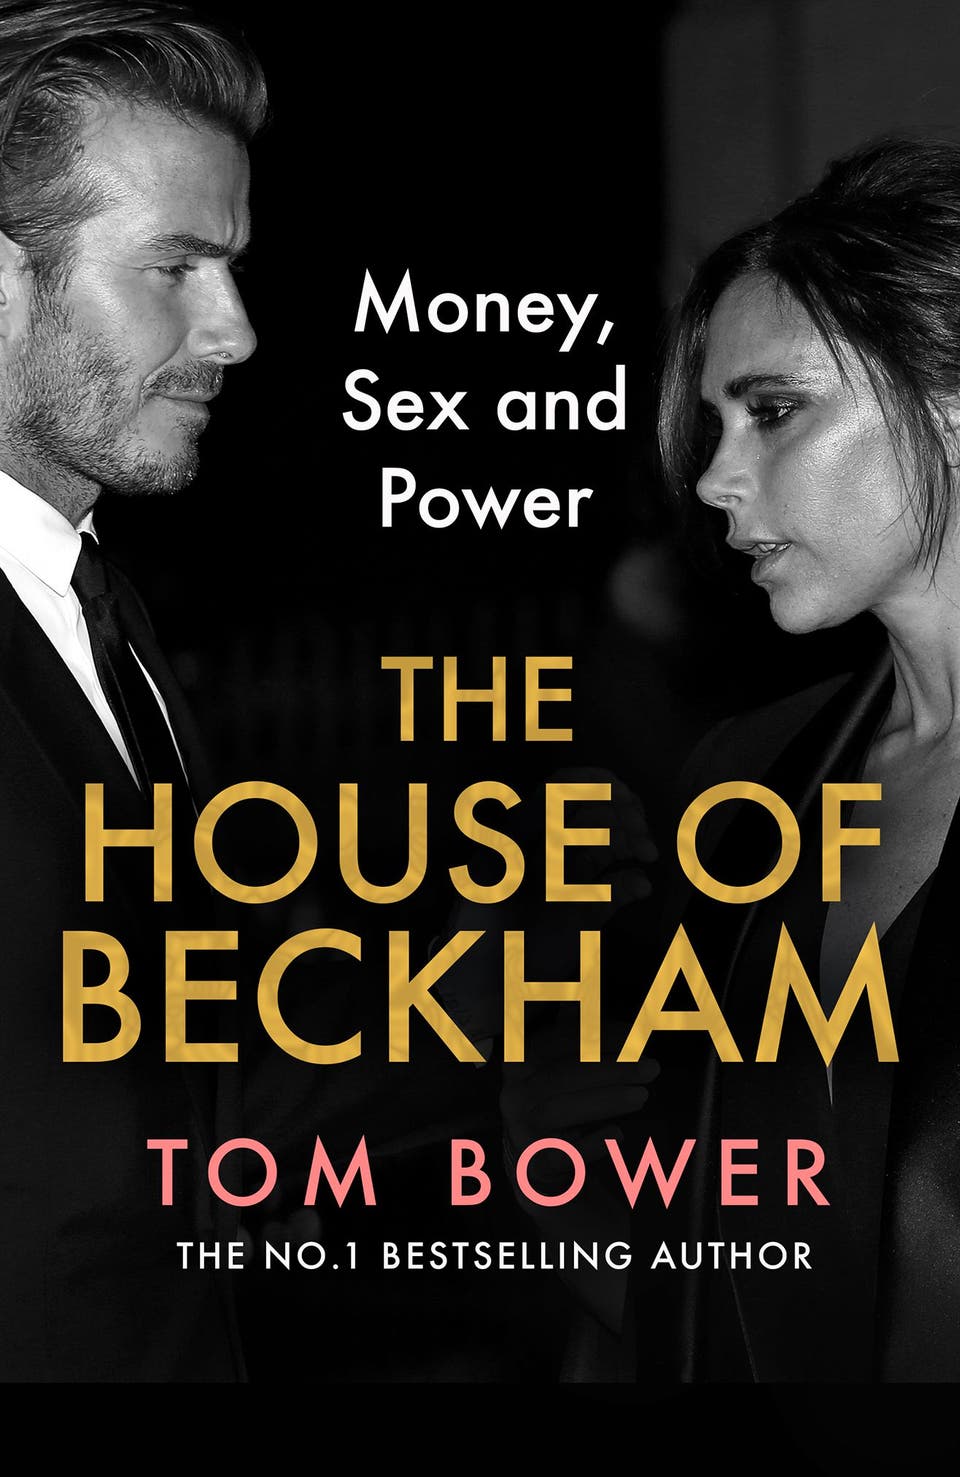 This book can't quite solve the great Beckham mystery 